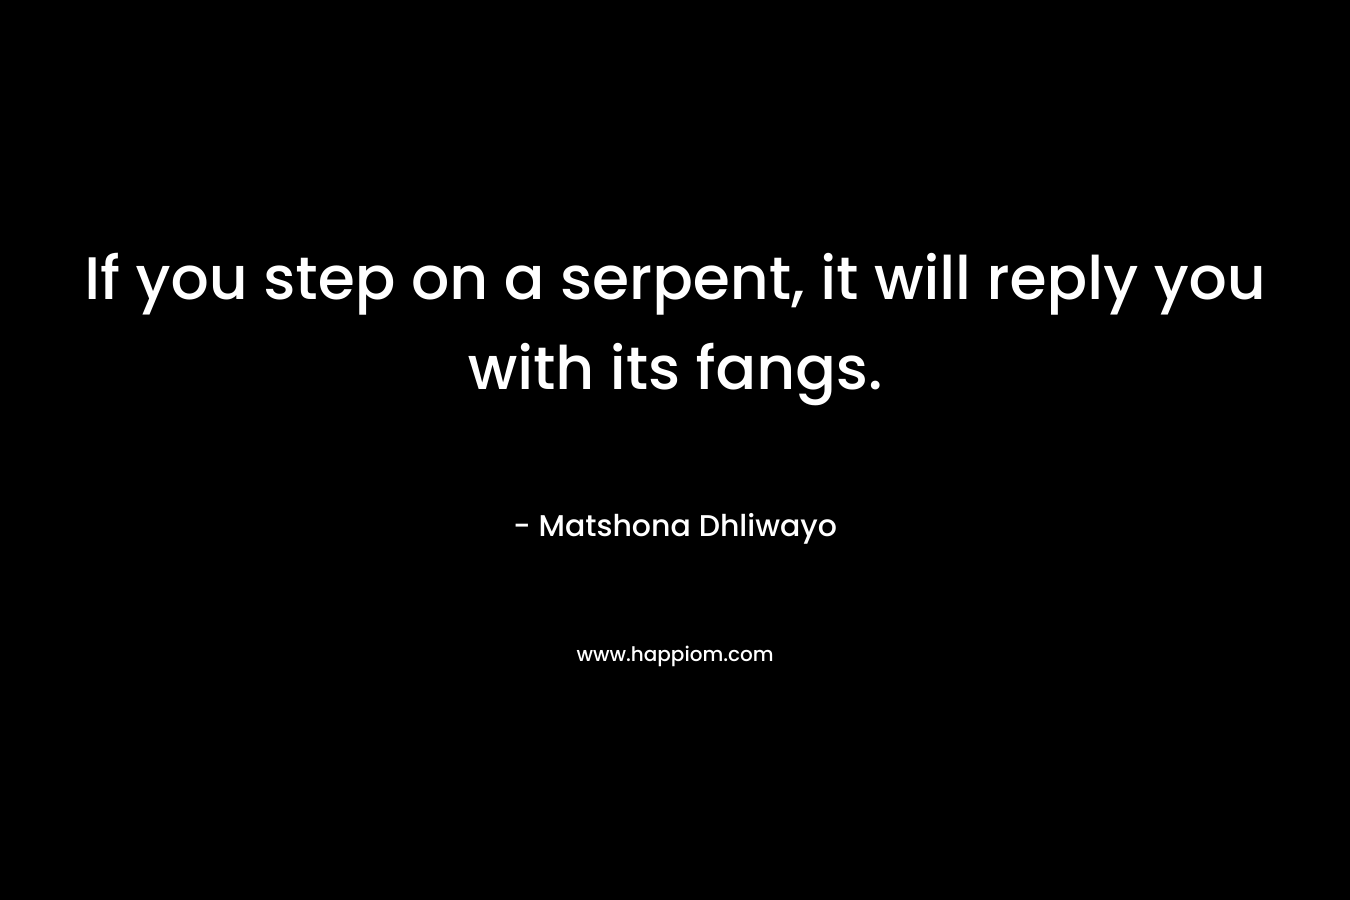 If you step on a serpent, it will reply you with its fangs.